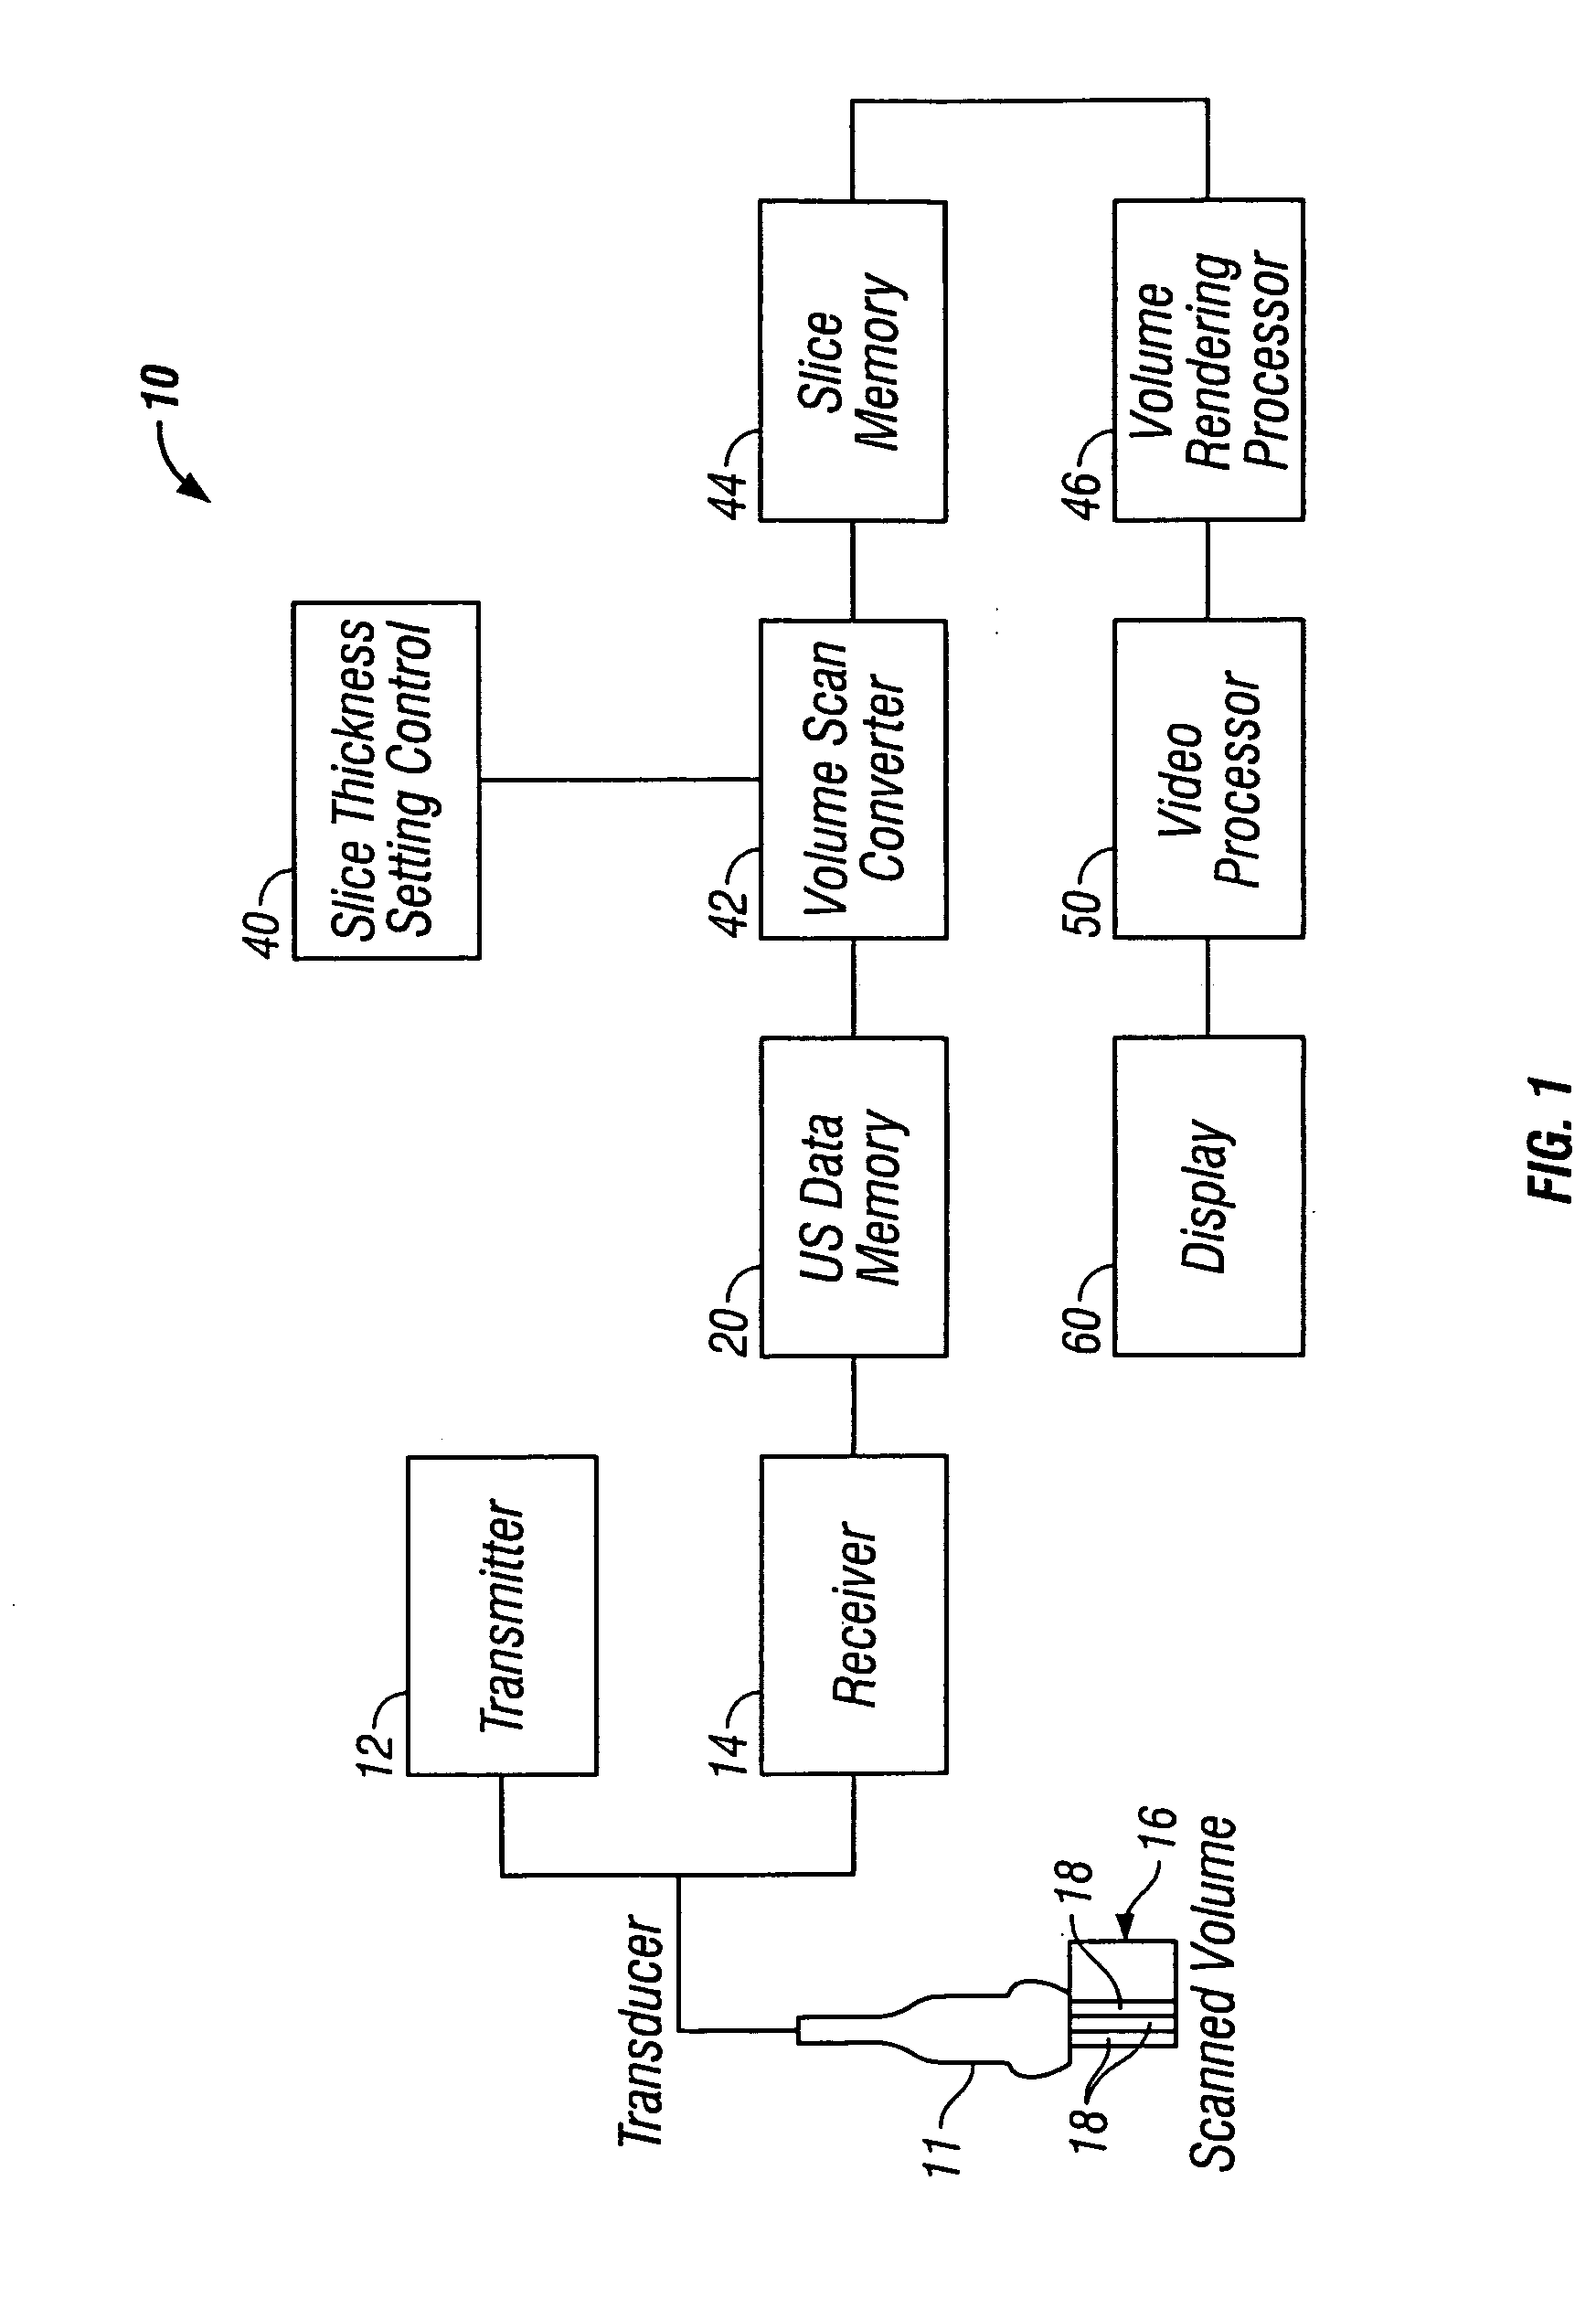 Voice control of a generic input device for an ultrasound system